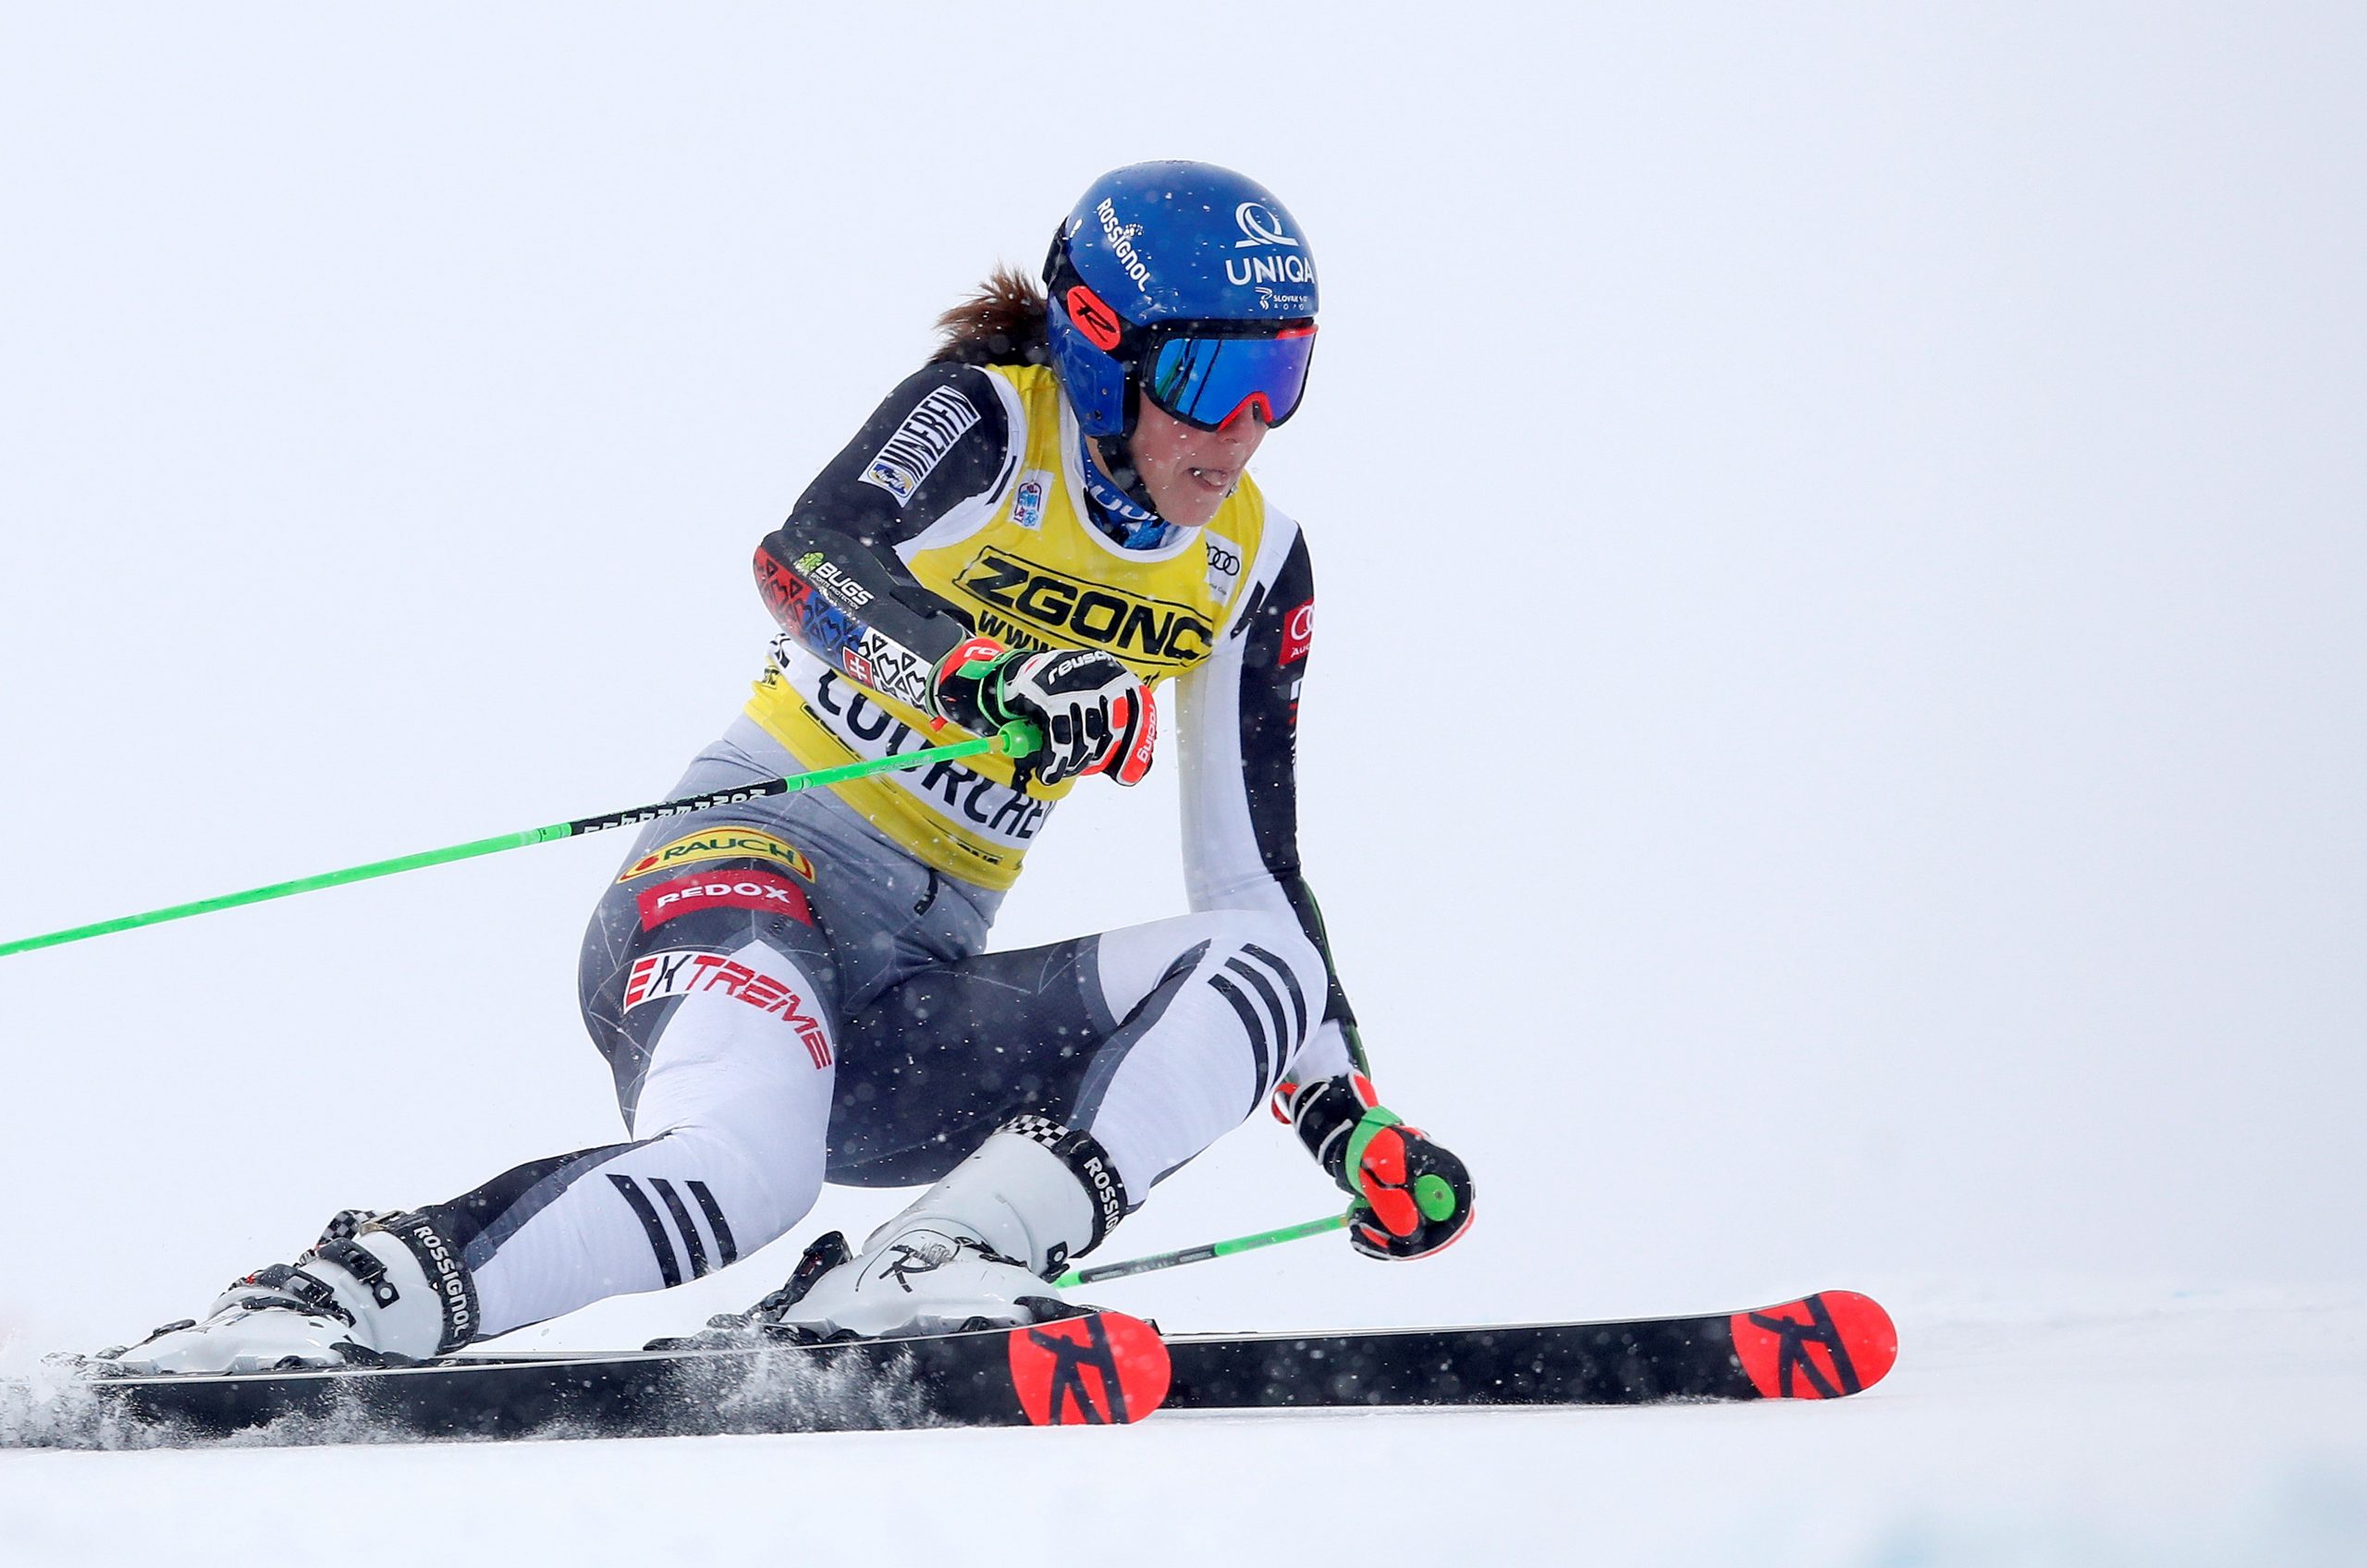 epa08878631 Petra Vlhova of Slovakia in action during the Women's Giant Slalom race at the FIS Alpine Skiing World Cup in Courchevel, France, 12 December 2020.  EPA/SEBASTIEN NOGIER